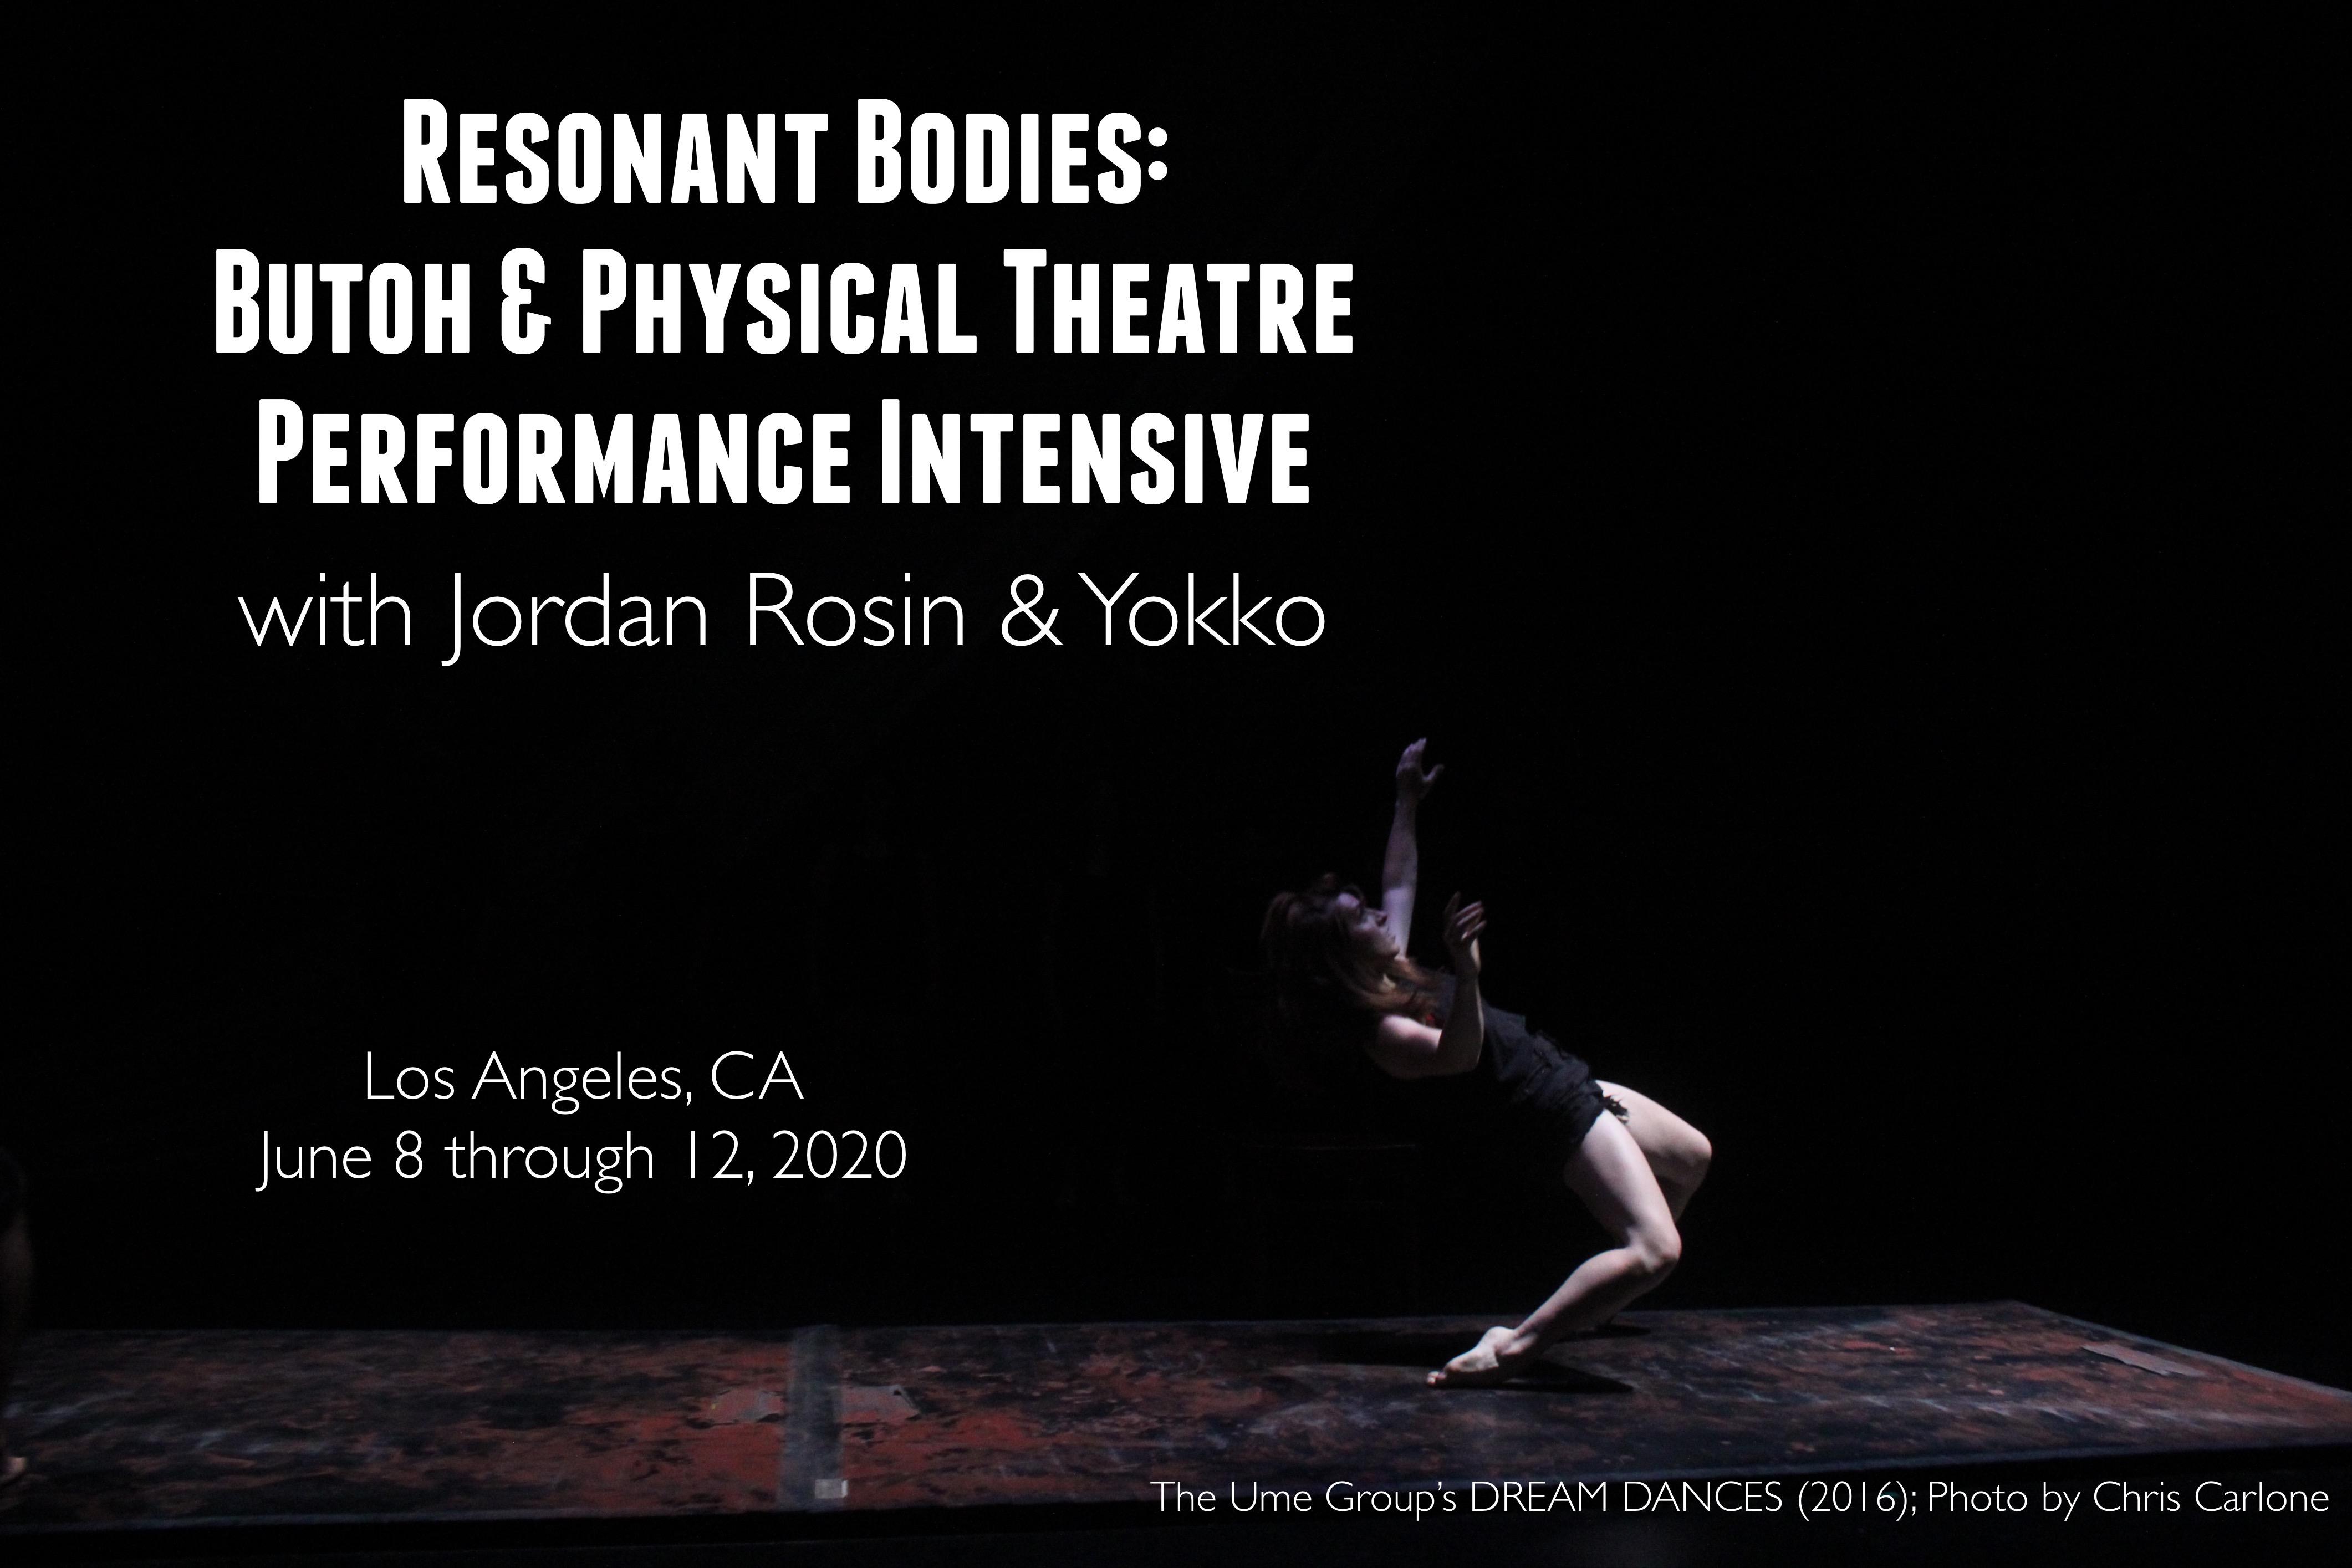 Resonant Bodies: Butoh & Physical Theatre Performance Intensive